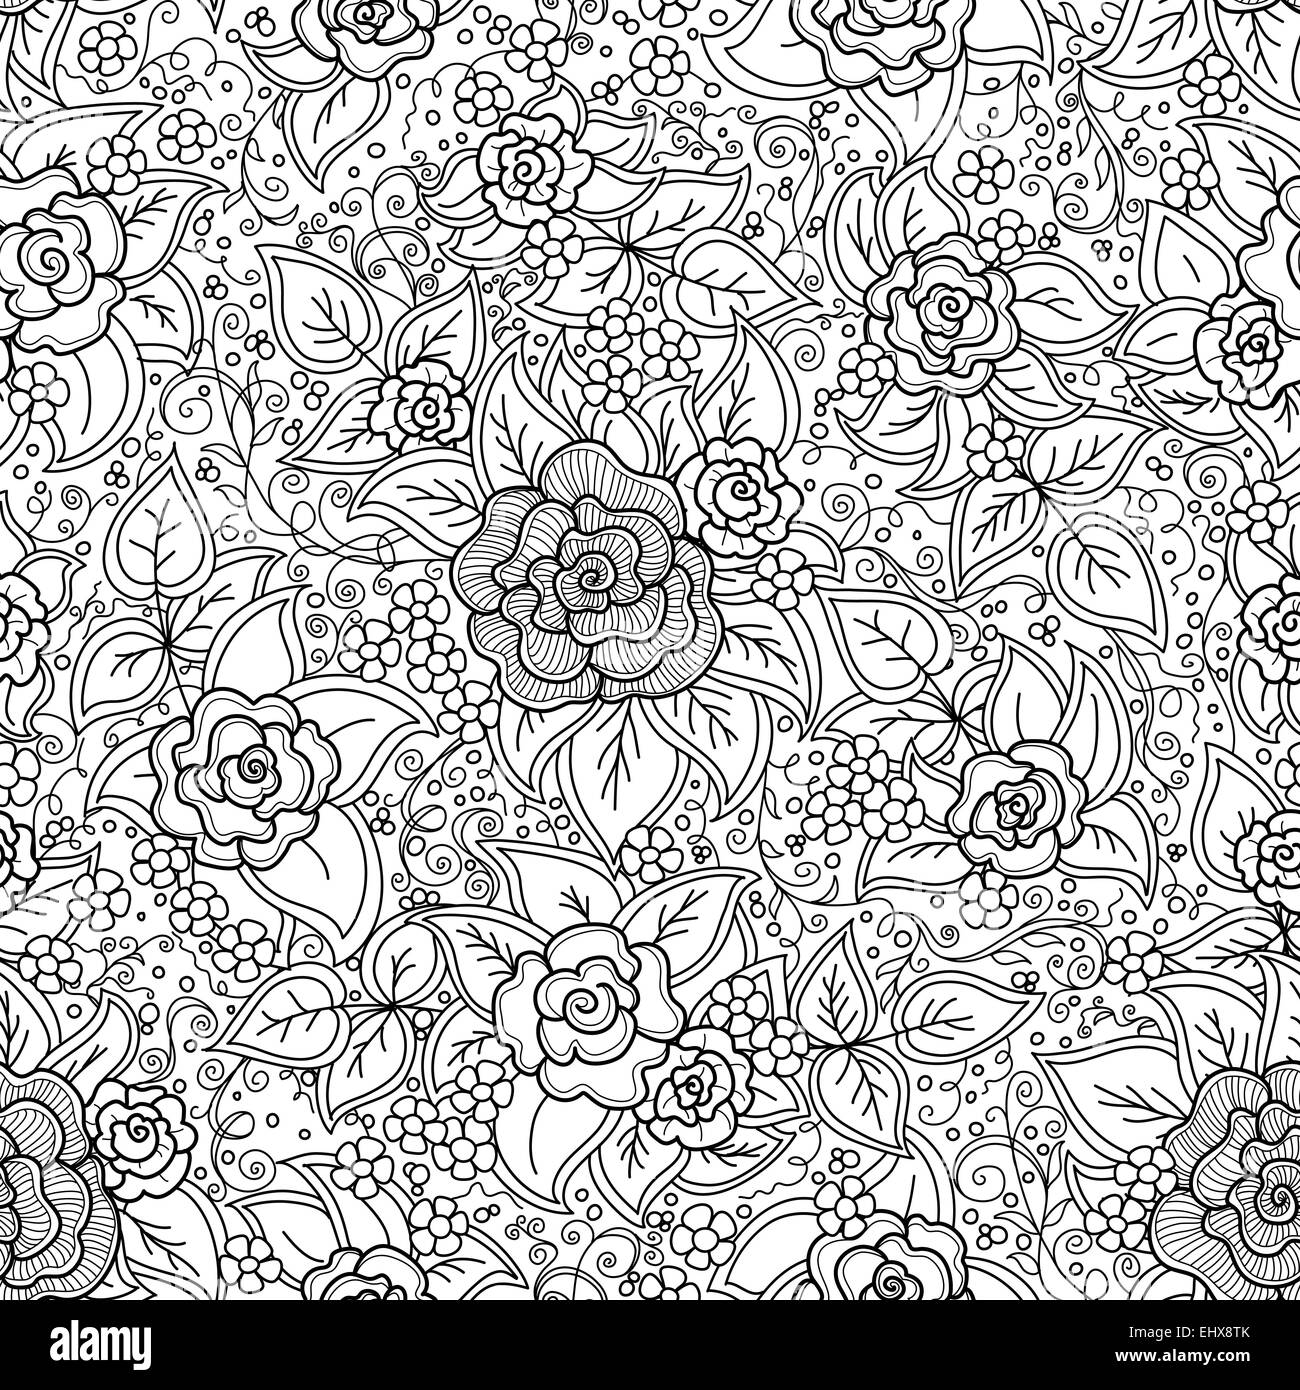 vector seamless black and white floral pattern Stock Photo